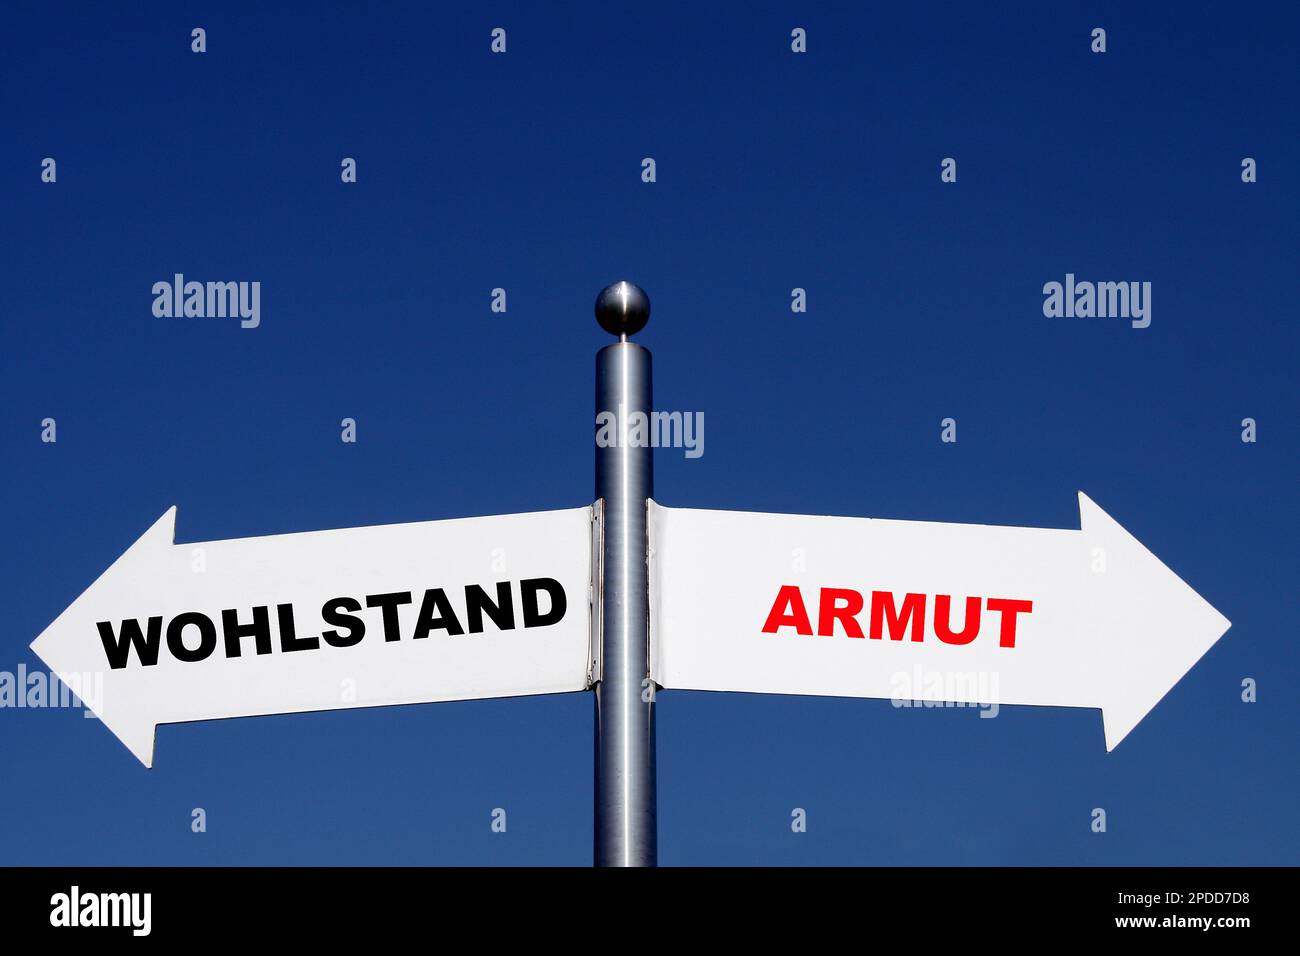 signposts pointing in different directions, options Wohlstand - Armut, richness - poverty Stock Photo